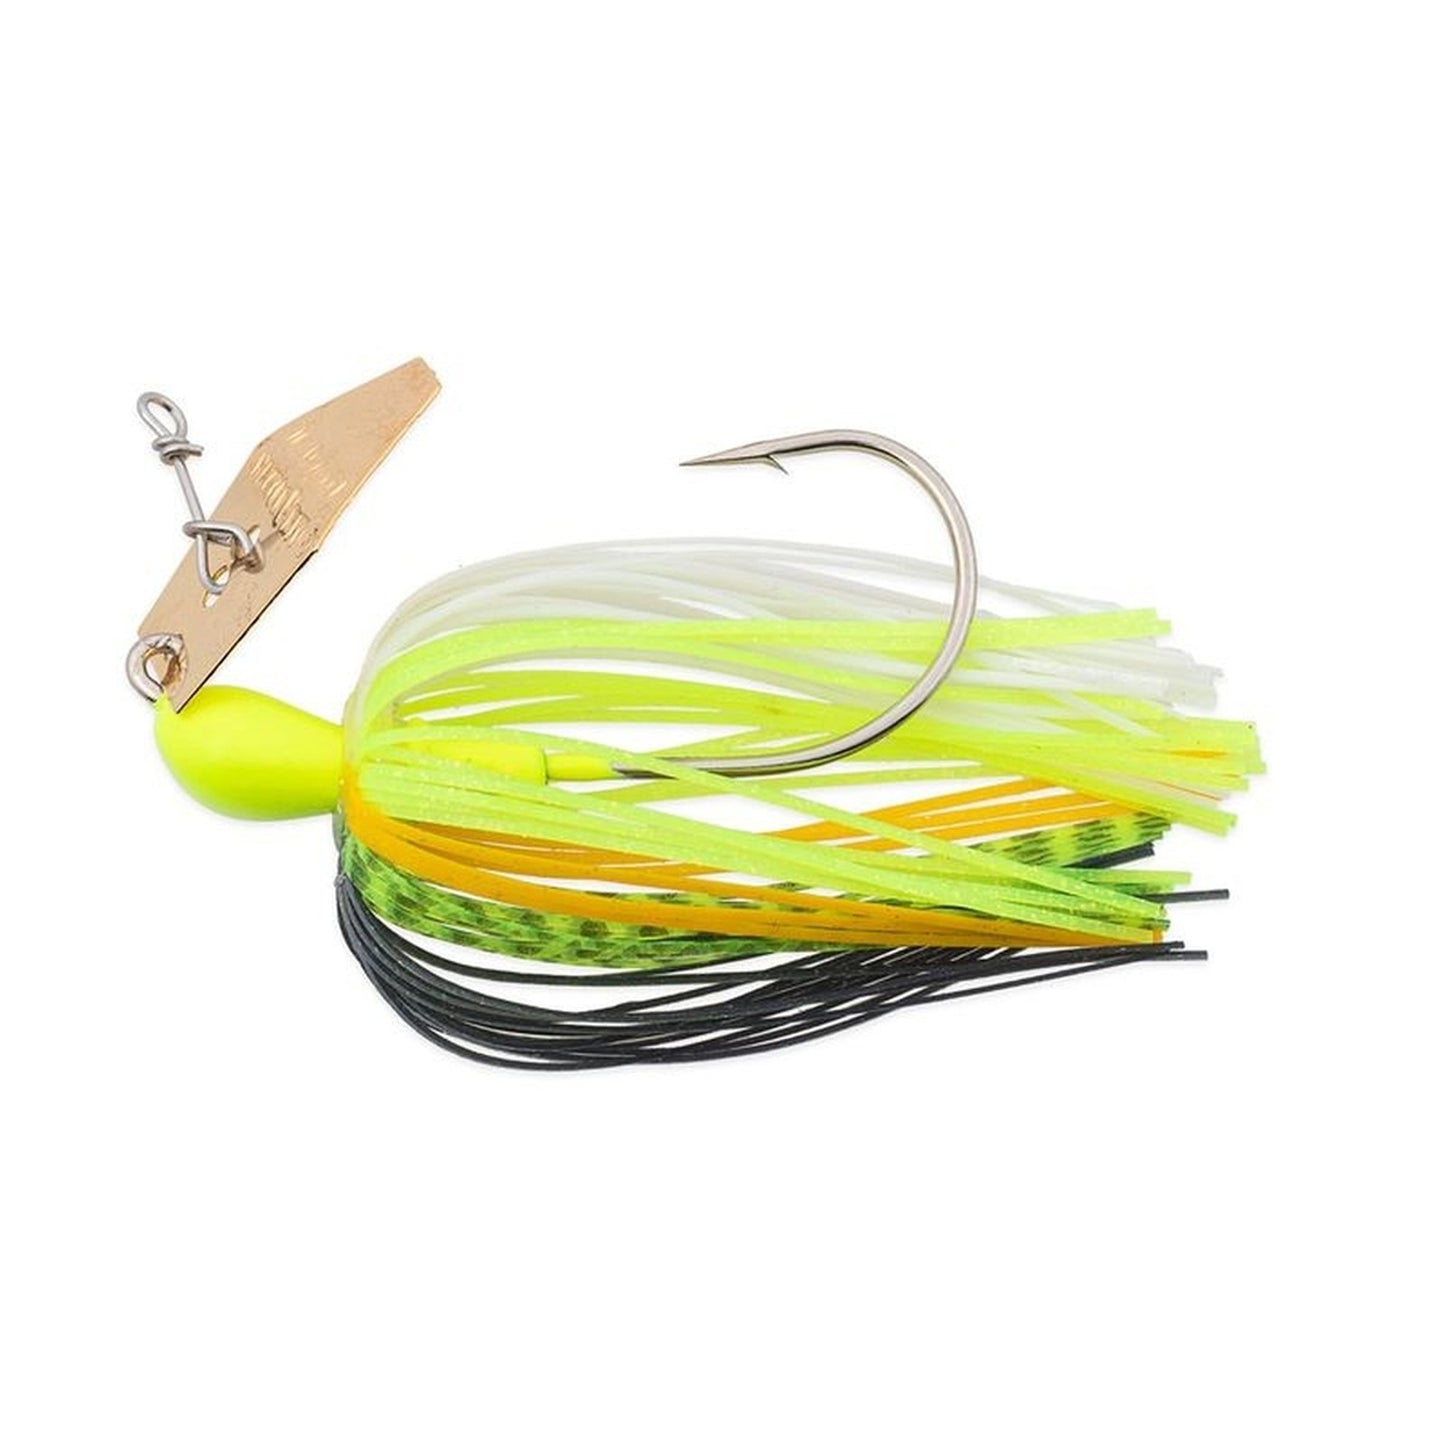 Z Man Original Chatterbait 10g Chartreuse Sexy Shad